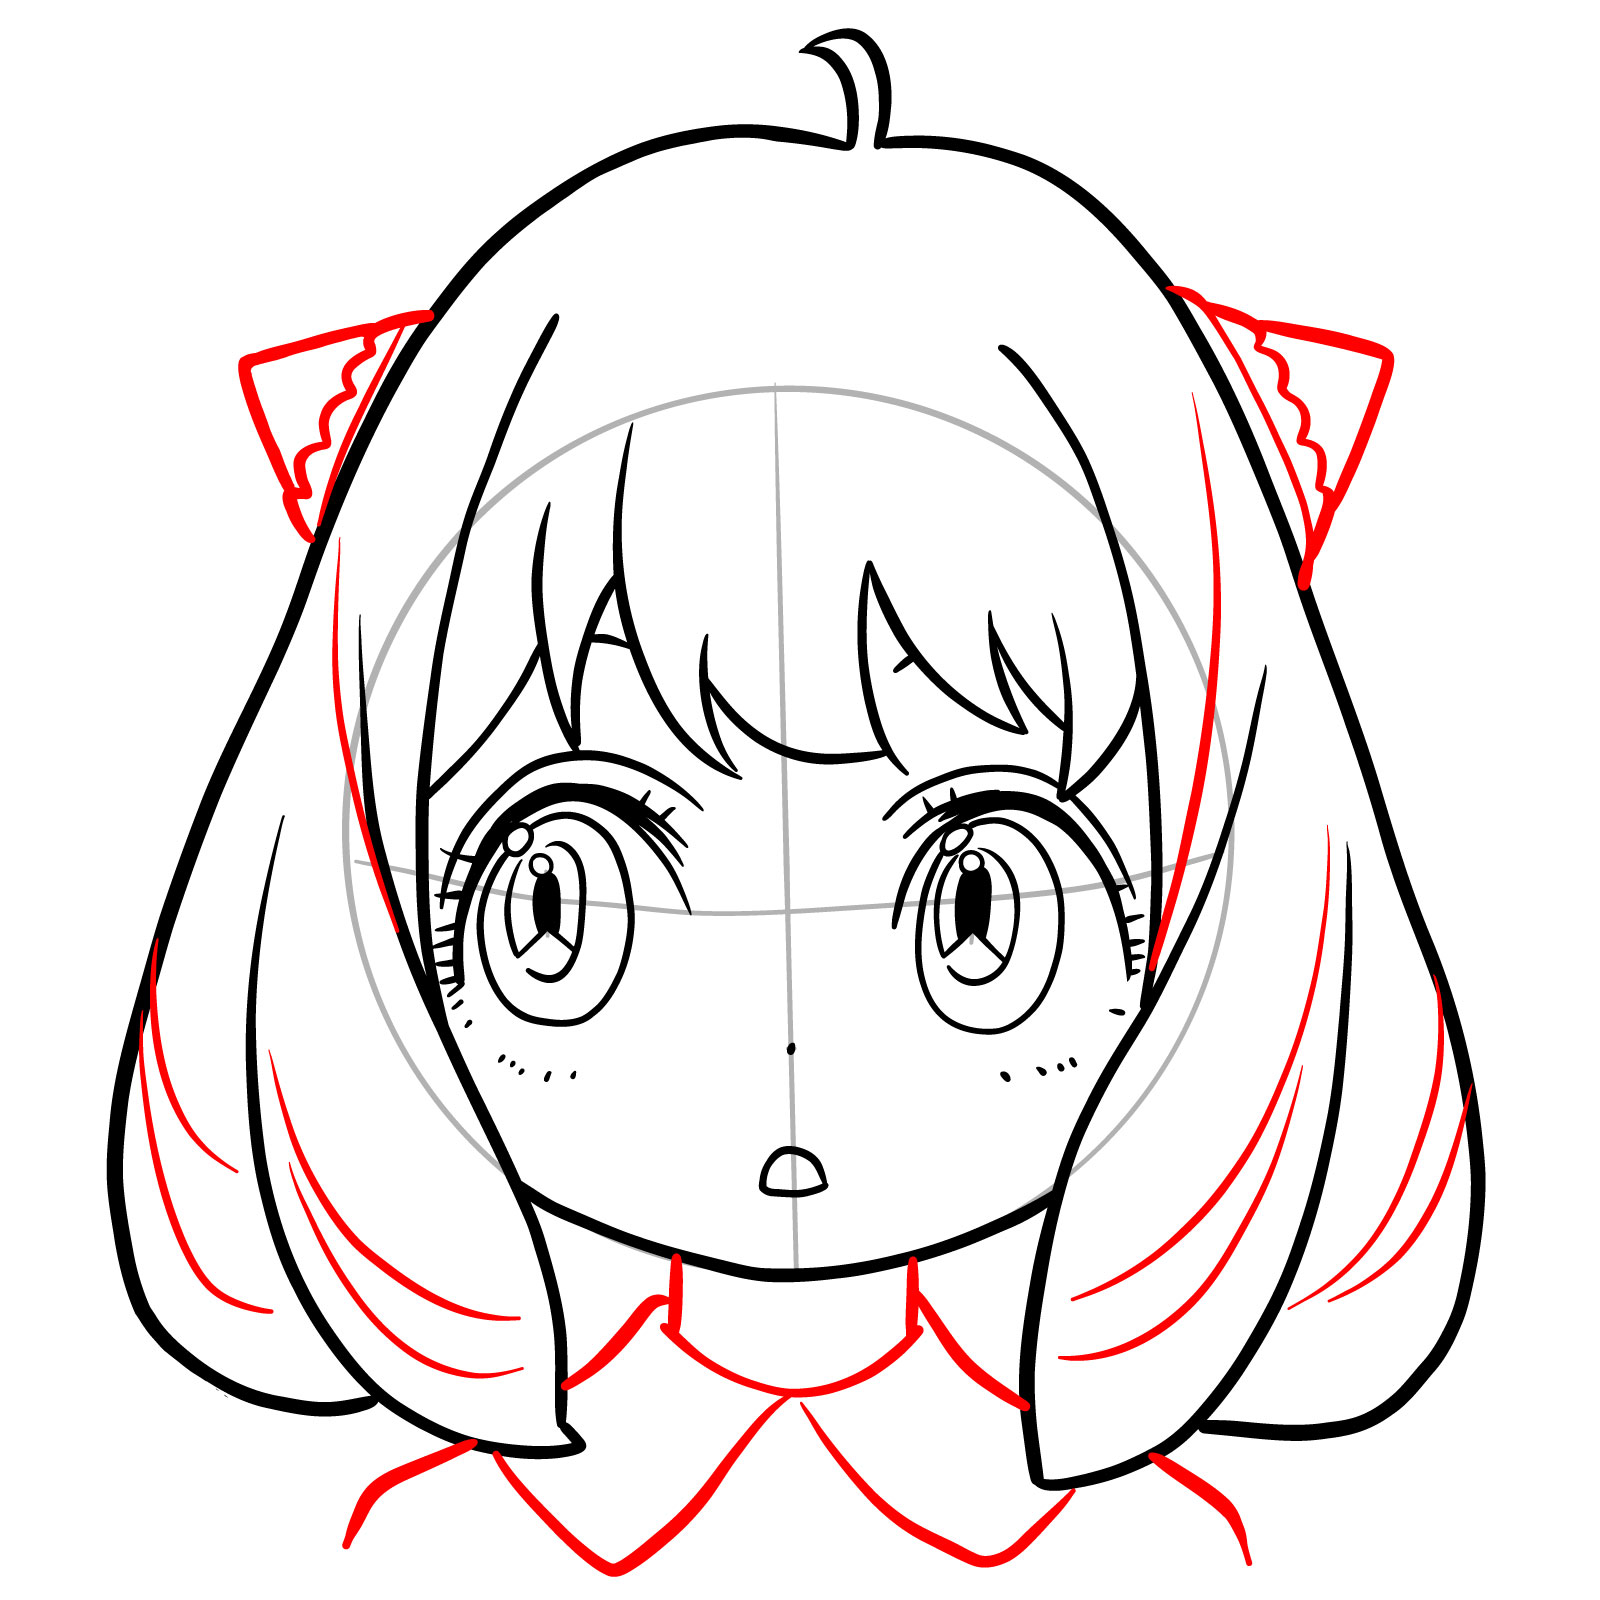 Final details of Anya's face drawing with hair accessories and outfit outline - step 11